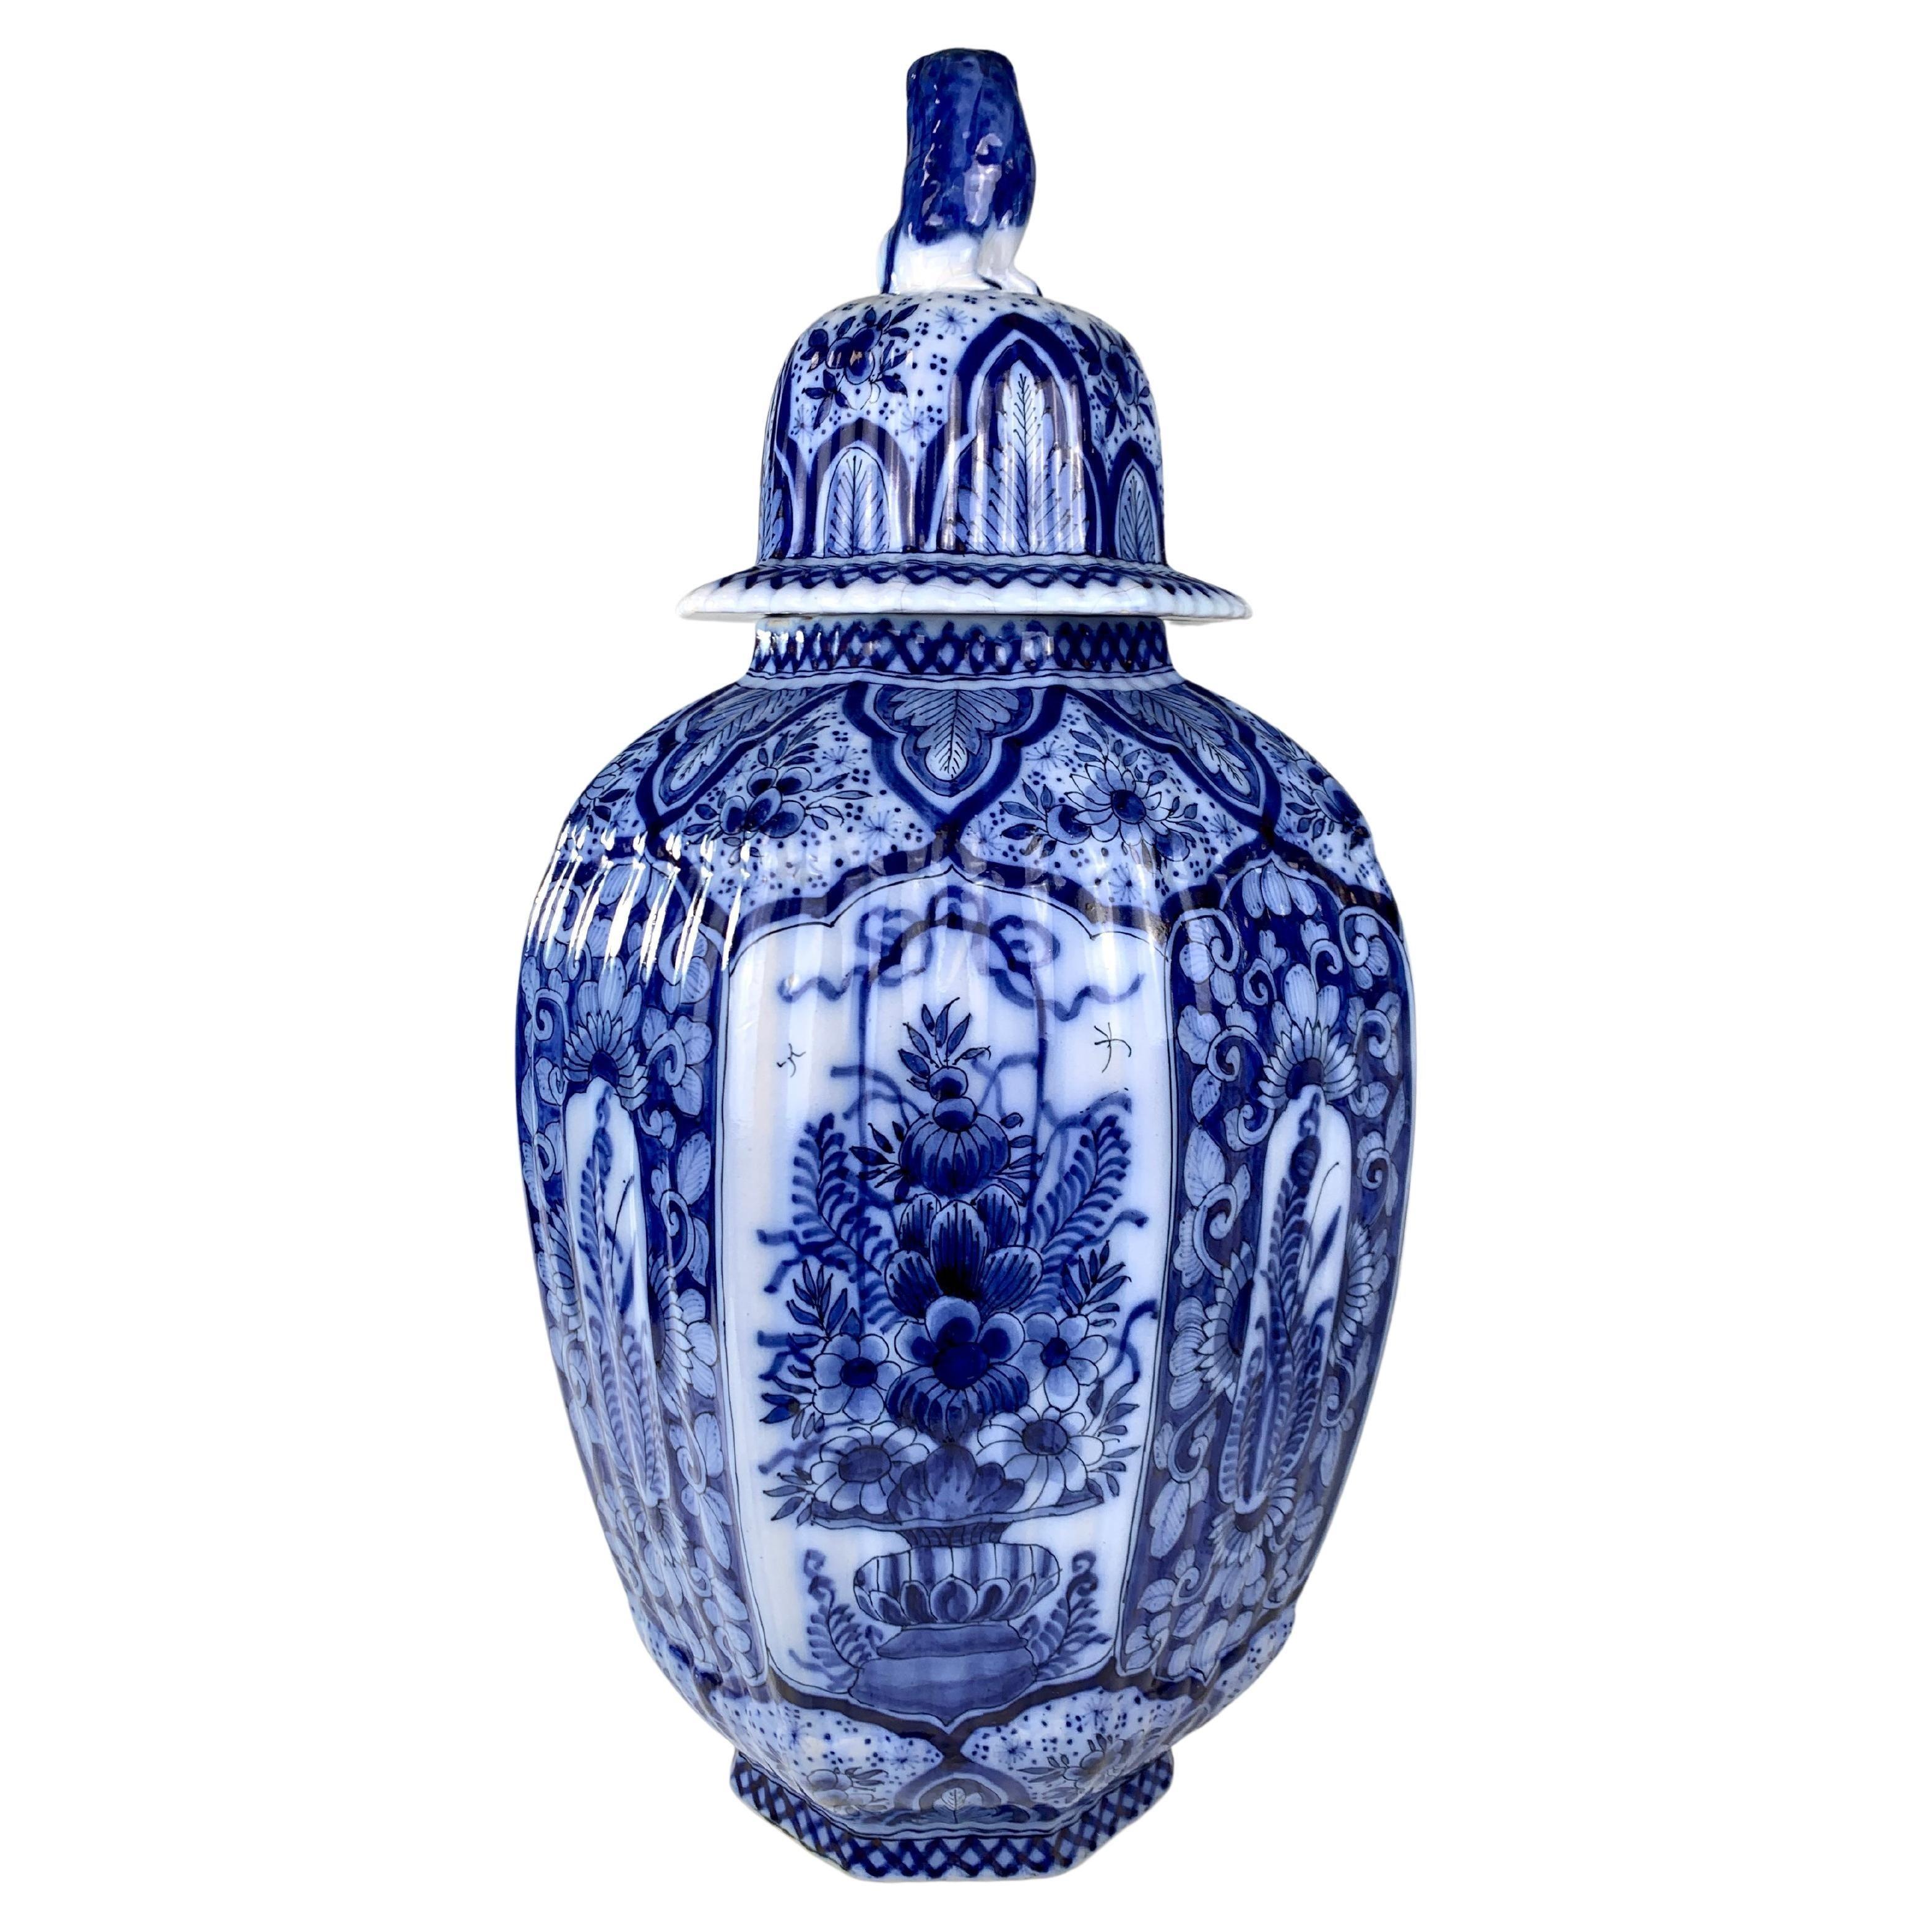 This fabulous Delft jar is painted with traditional deep cobalt blue on a tin-glazed ground.
The jar has six panels, which alternate between flowers in a basket and ferns with scrolling vines.
Large blue lappets decorate the shoulders and cover.
The